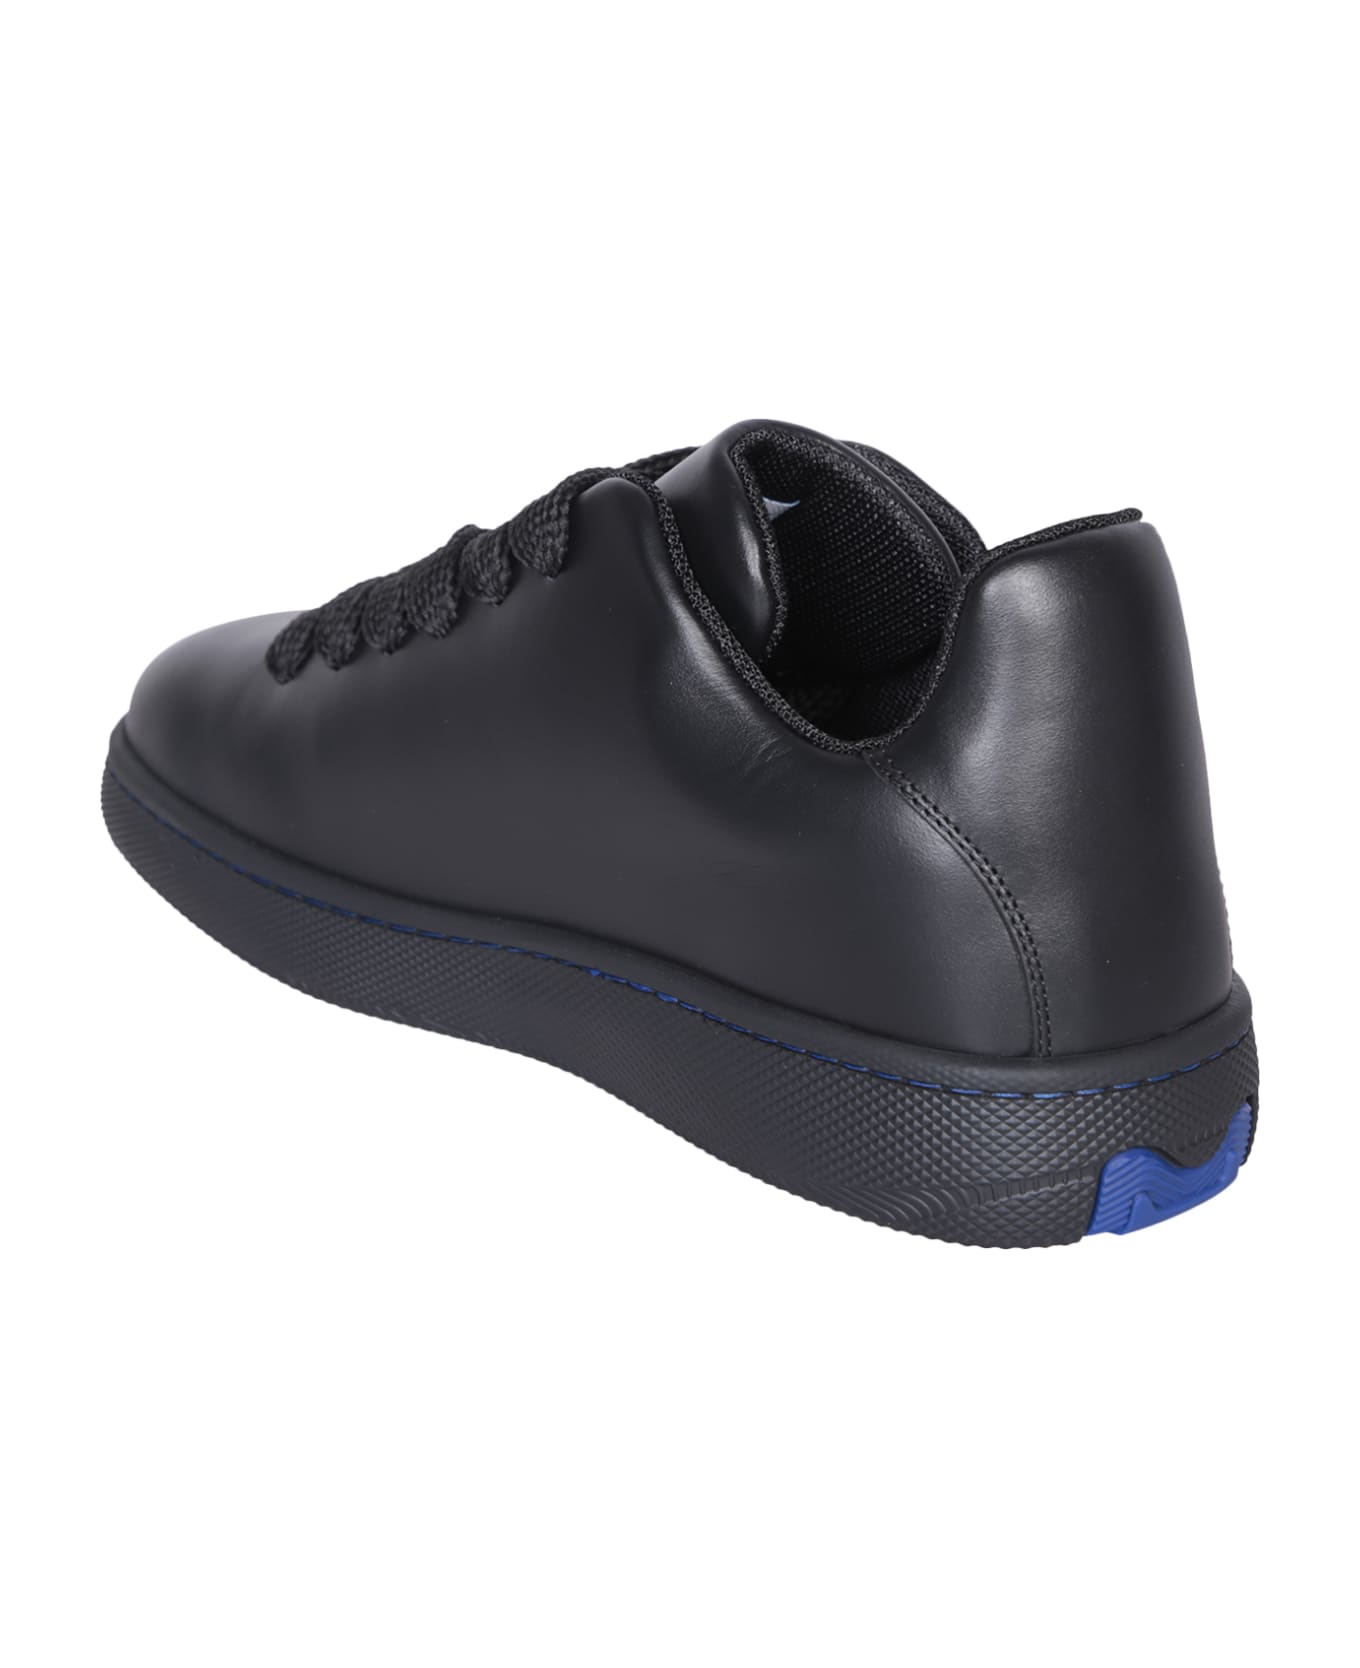 Burberry Leather Black Sneakers - Black